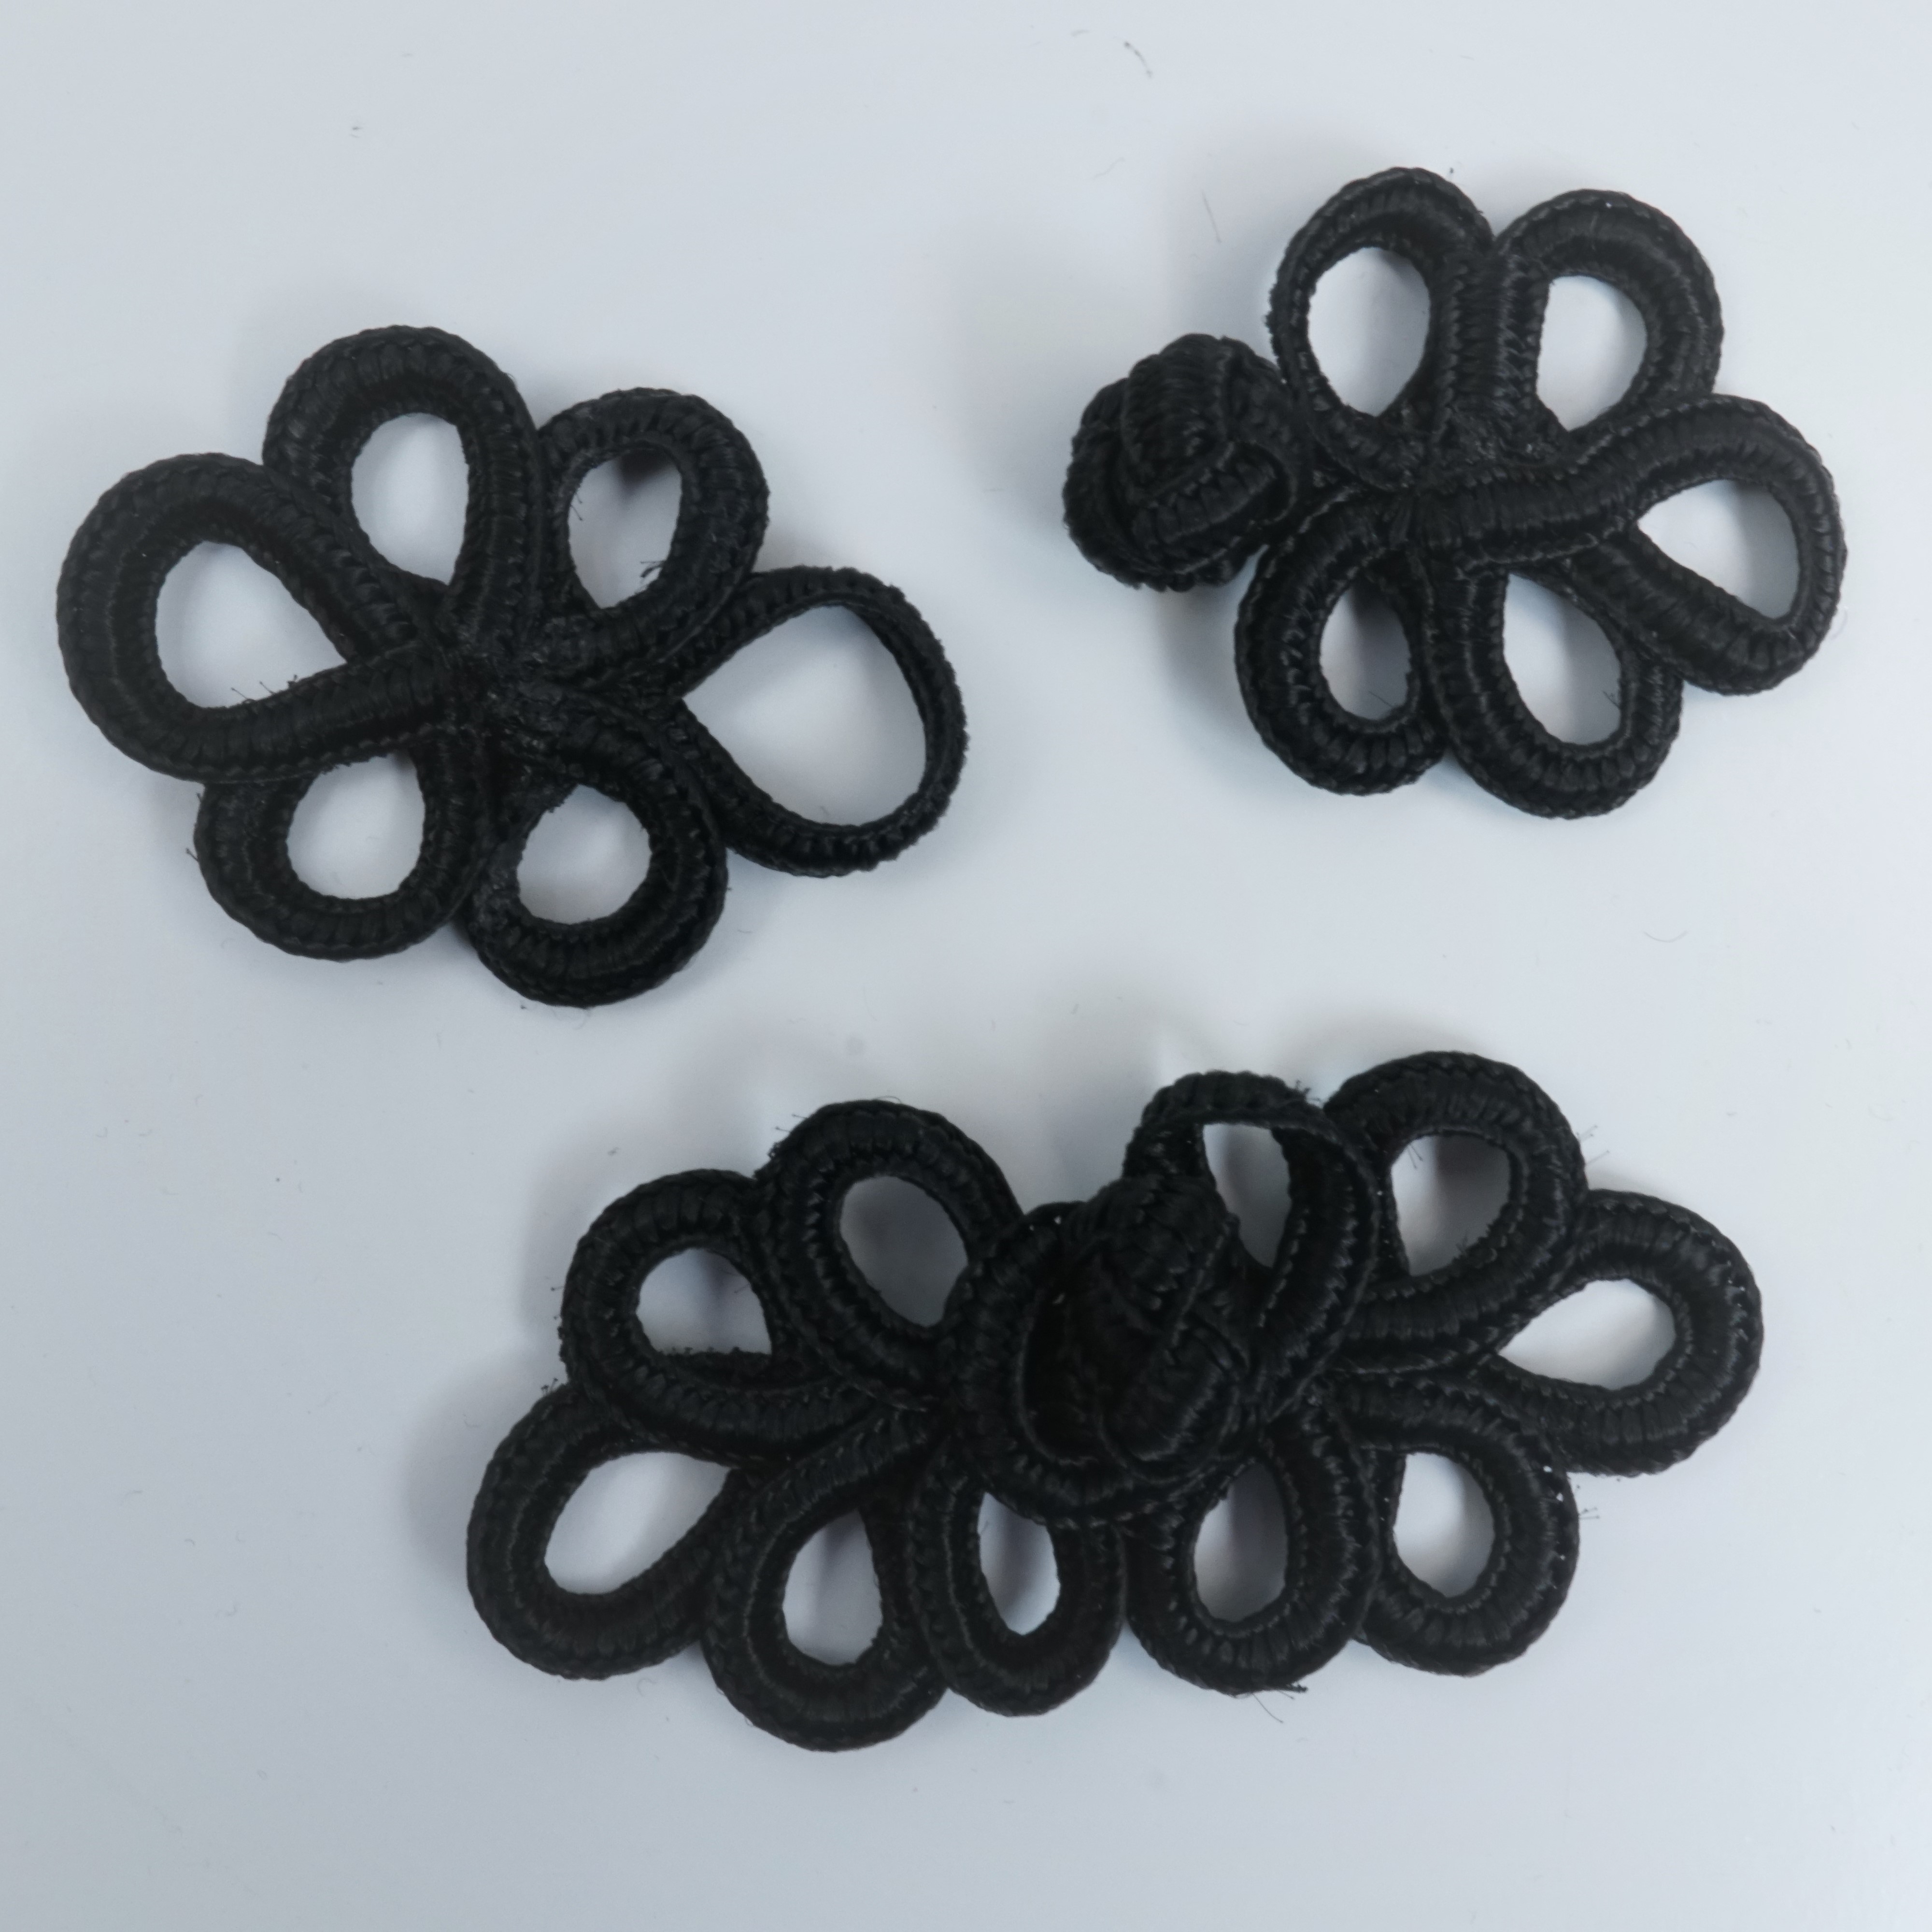 Frog Fasteners, Chinese Knot Fasteners - 2 Pack - Black